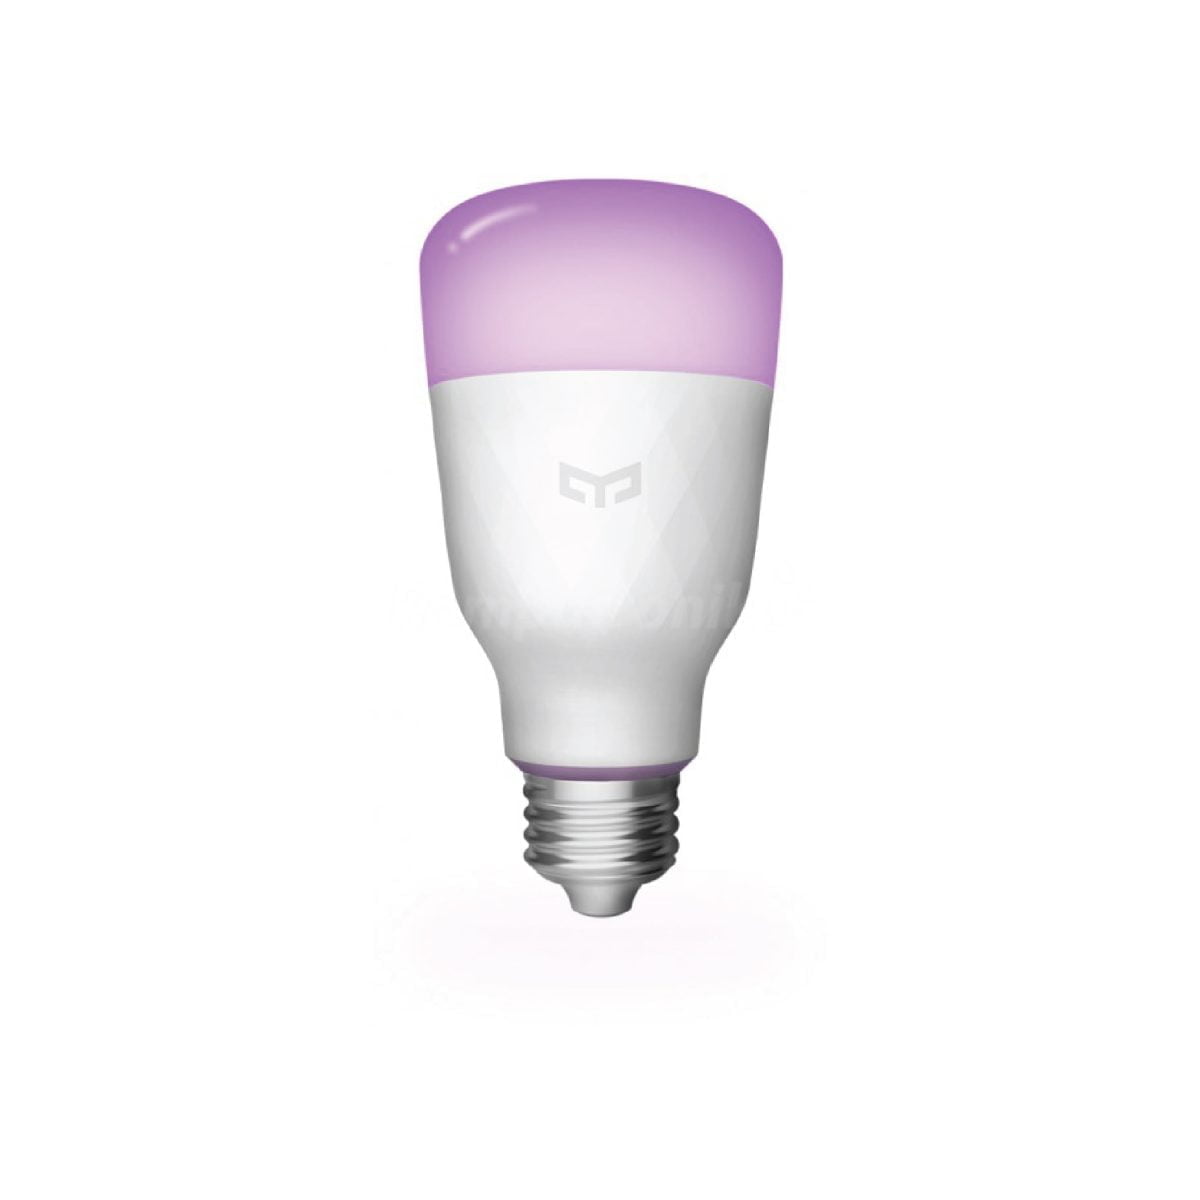 Bulb 23 Xiaomi The Yeelight 1S Rgb Smart Light Bulb Will Allow You To Create Your Own Smart Home. You Can Control It With Your Voice Or Application And Decide With What Temperature And Power It Should Shine. Luminous Flux: 800Lm Color Temperature: 1700K-6500K Lamp Holder: E27 Rated Power: 8.5W &Nbsp; 16 Million Colors Wifi Enabled, Voice Control, App Control, Music Sync &Lt;Img Class=&Quot;Alignnone Wp-Image-8061 Size-Full&Quot; Src=&Quot;Https://Lablaab.com/Wp-Content/Uploads/2020/04/Bulb-27-2-Scaled.jpg&Quot; Alt=&Quot;&Quot; Width=&Quot;2560&Quot; Height=&Quot;357&Quot; /&Gt; &Nbsp; Yeelight Smart Bulb Yeelight Smart Bulb 1S (Color)